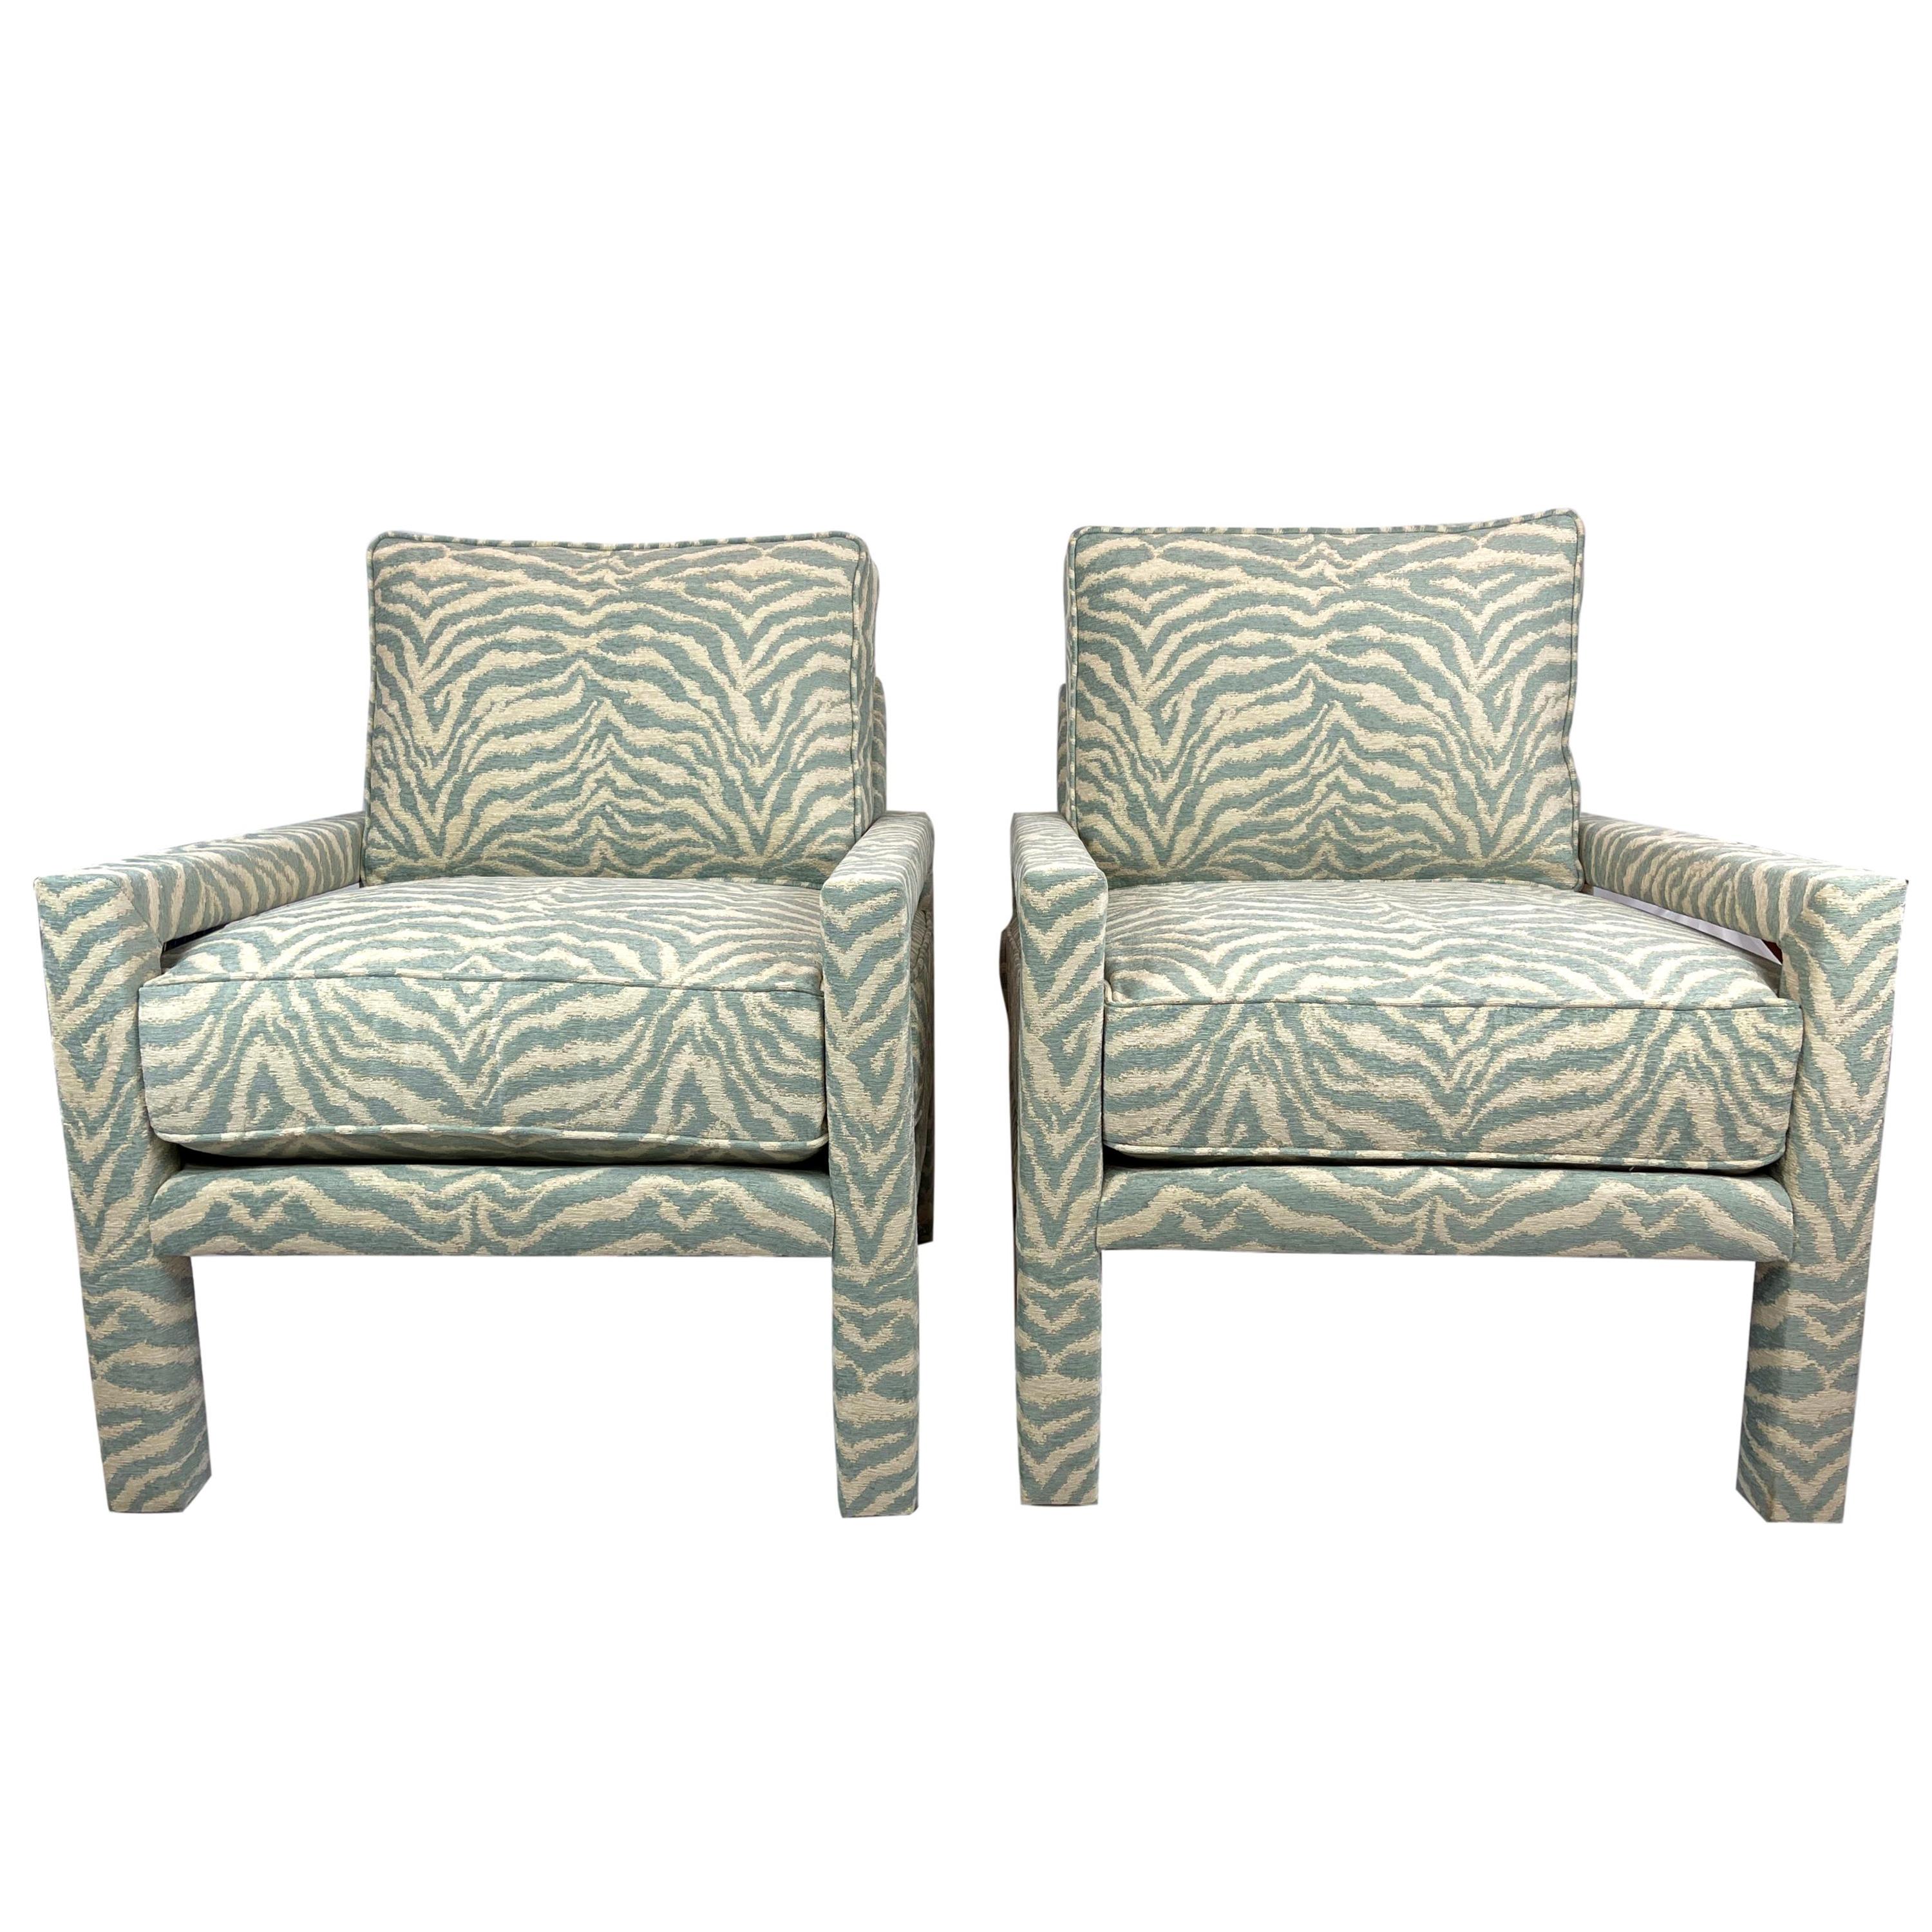 New Pair of Milo Baughman Style Parsons Chairs in Designer Celadon Zebra Fabric For Sale